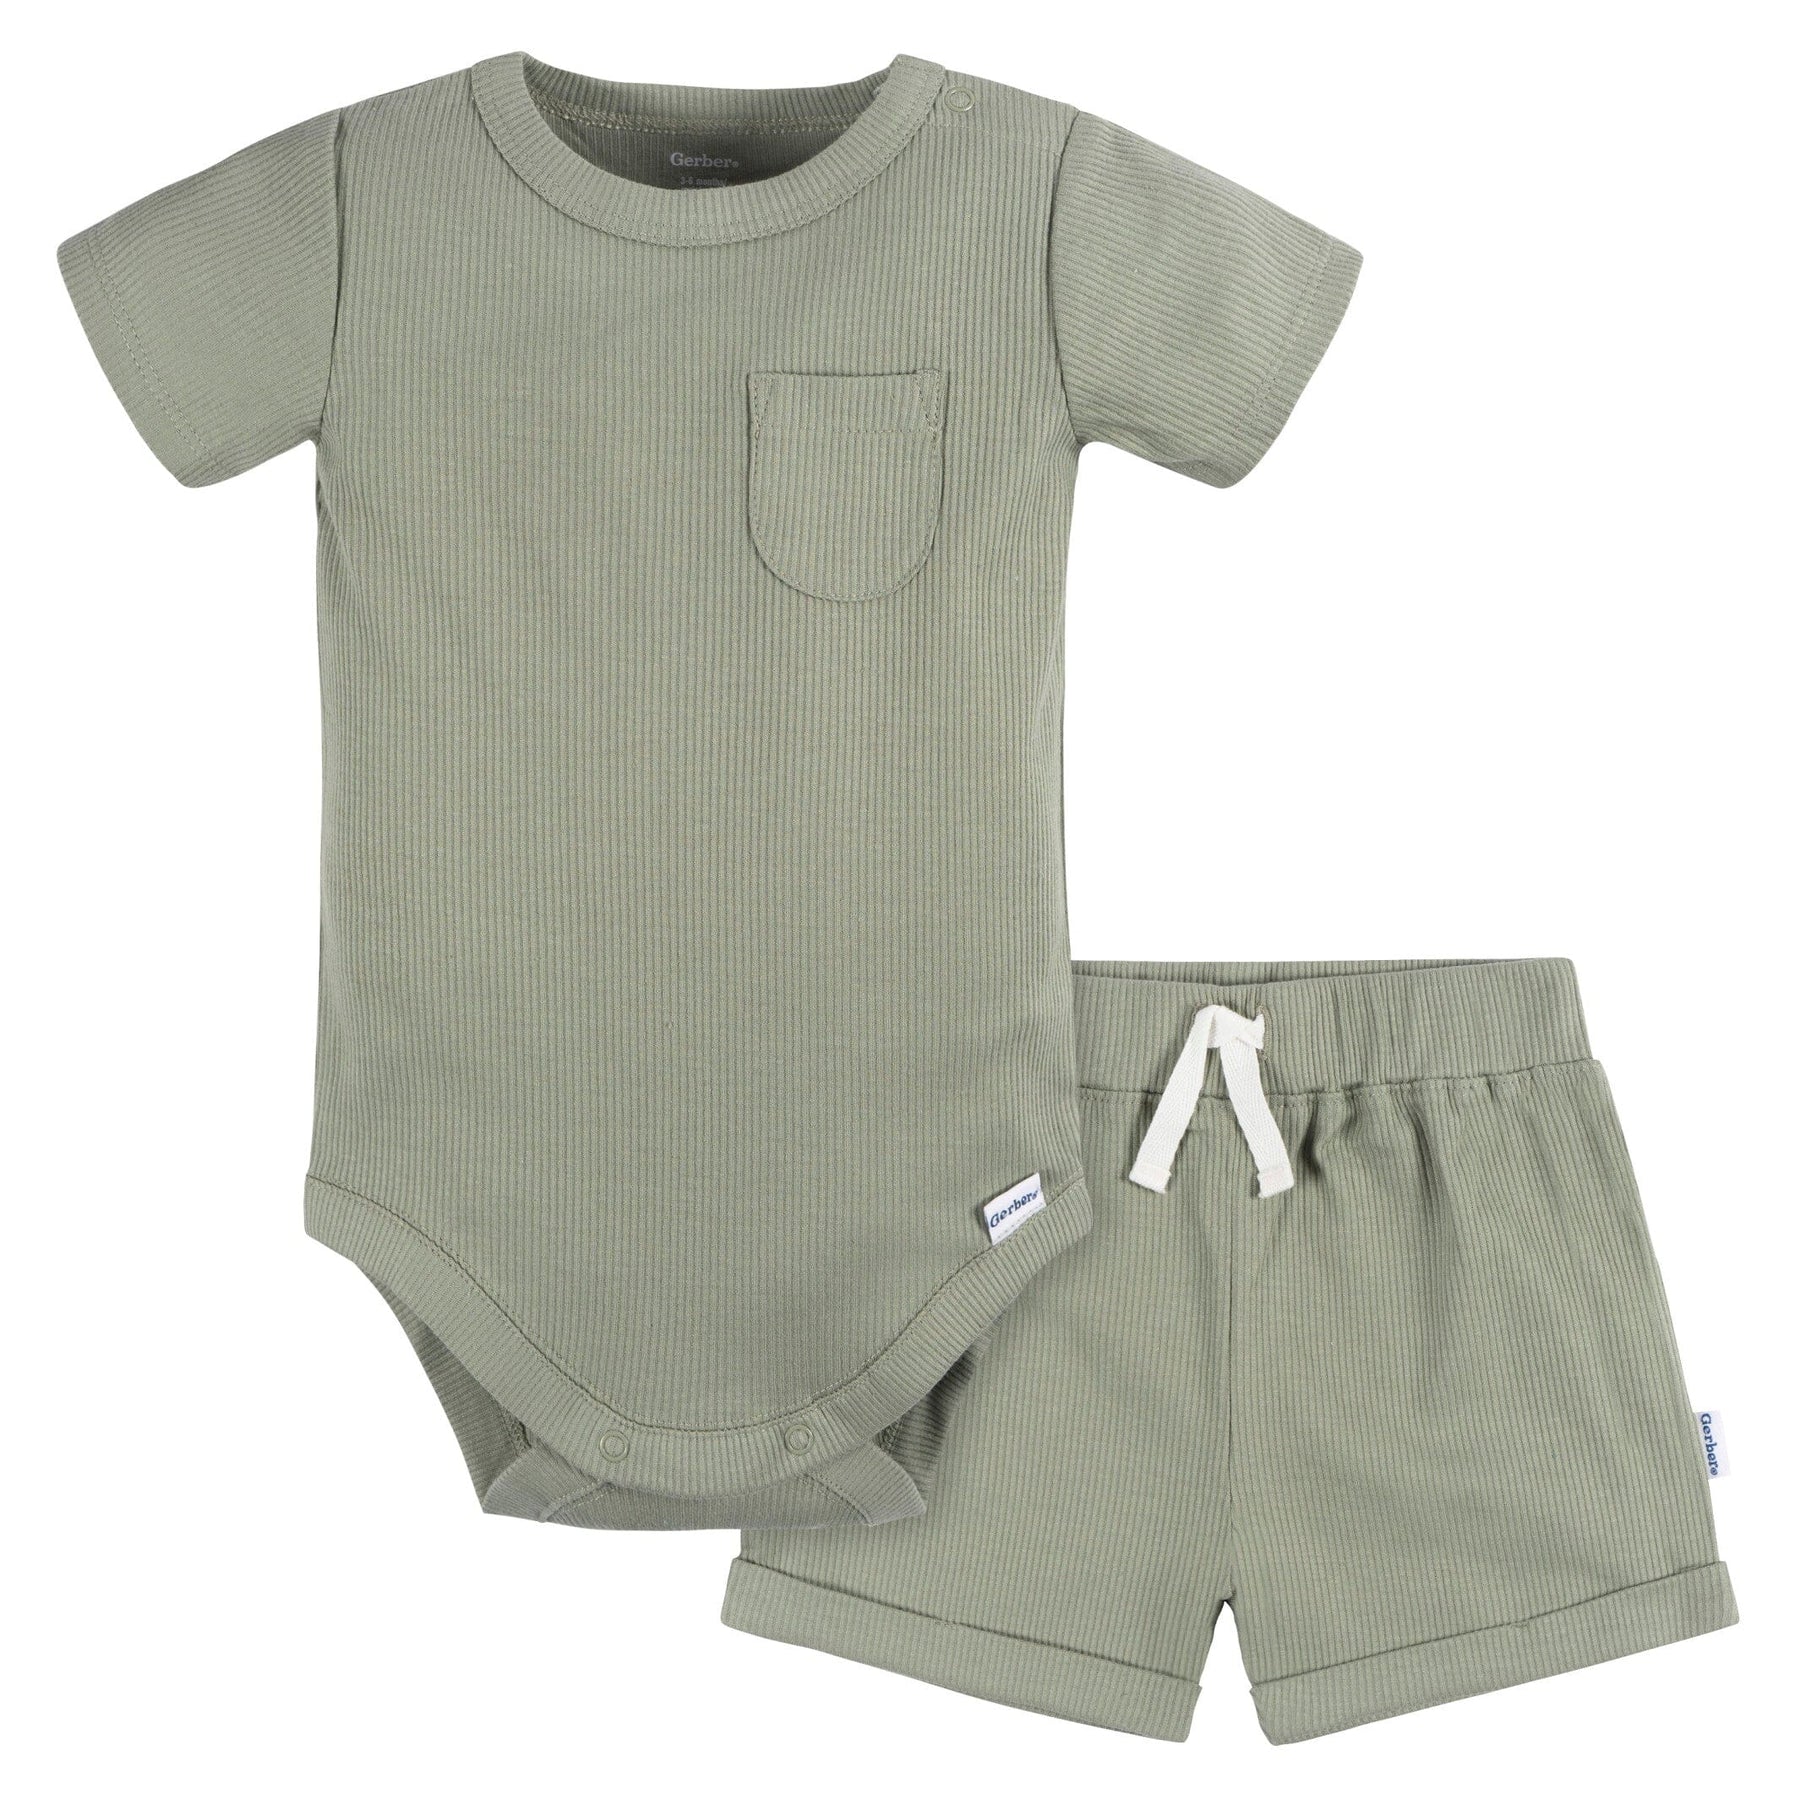 2-Piece Baby Boys Olive Bodysuit and Shorts Set – Gerber Childrenswear